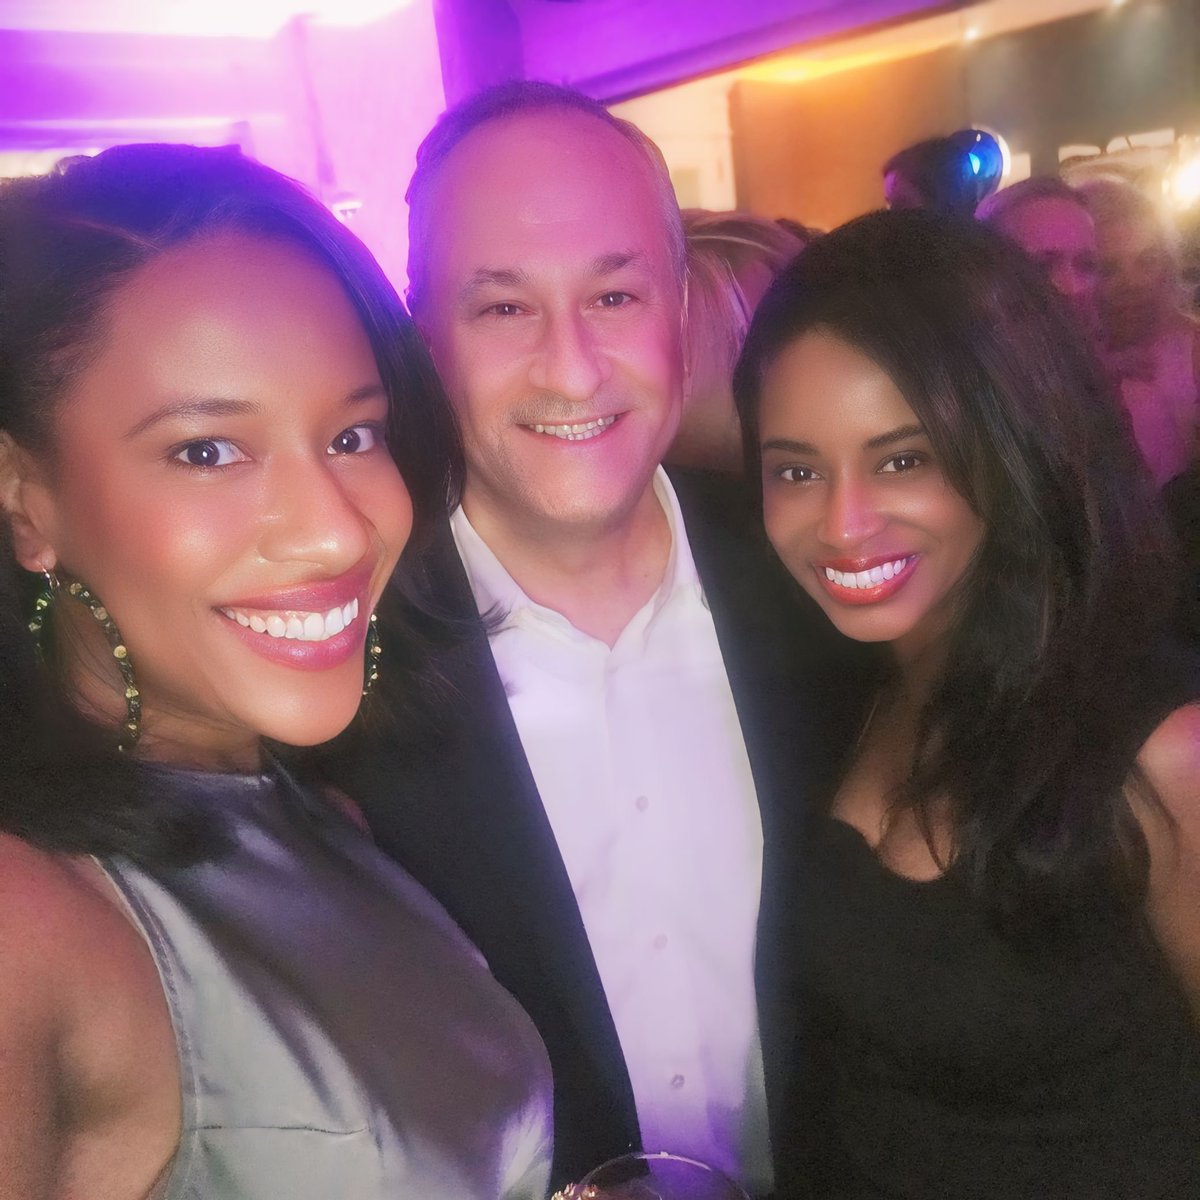 Nothing better than running into my dear friend, Second Gentleman @DouglasEmhoff at a DC shindig! #WHCD weekend is in full effect!